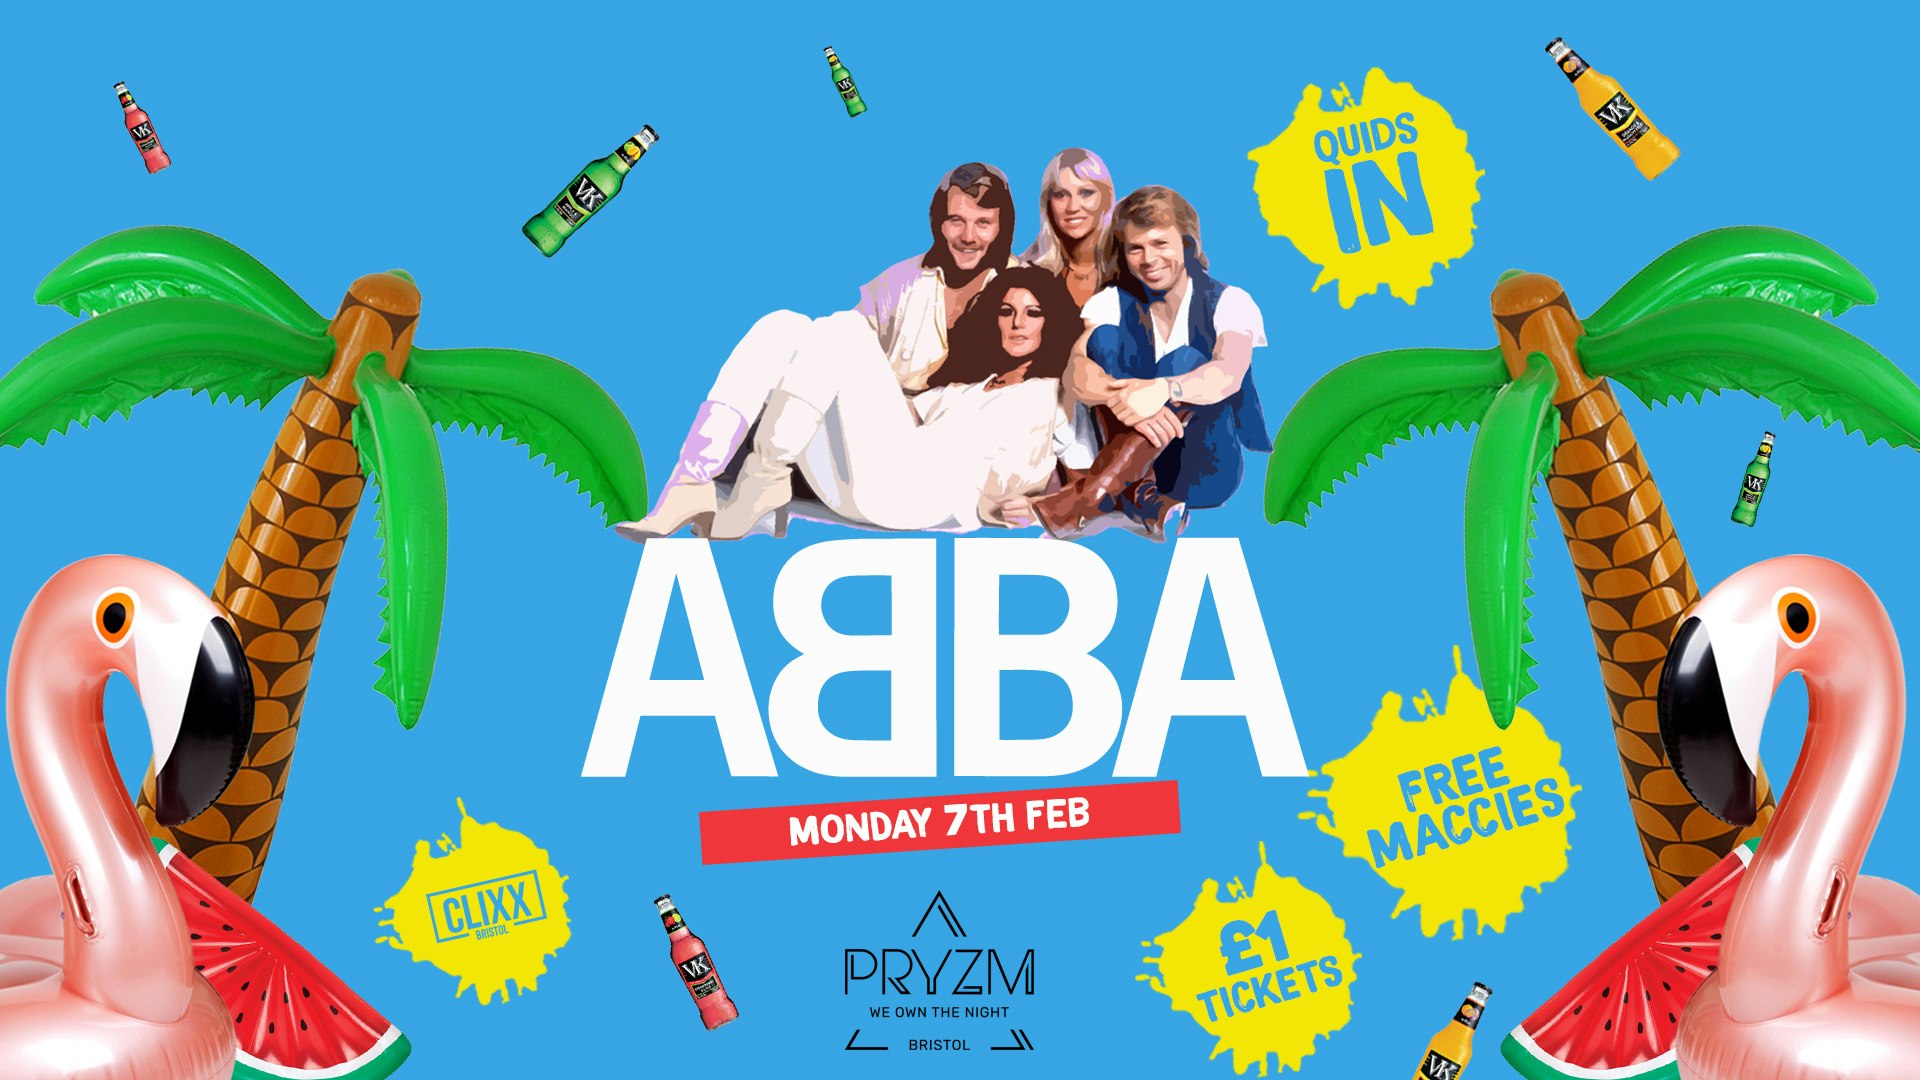 QUIDS IN / ABBA TAKEOVER  –  £1 Tickets running low!